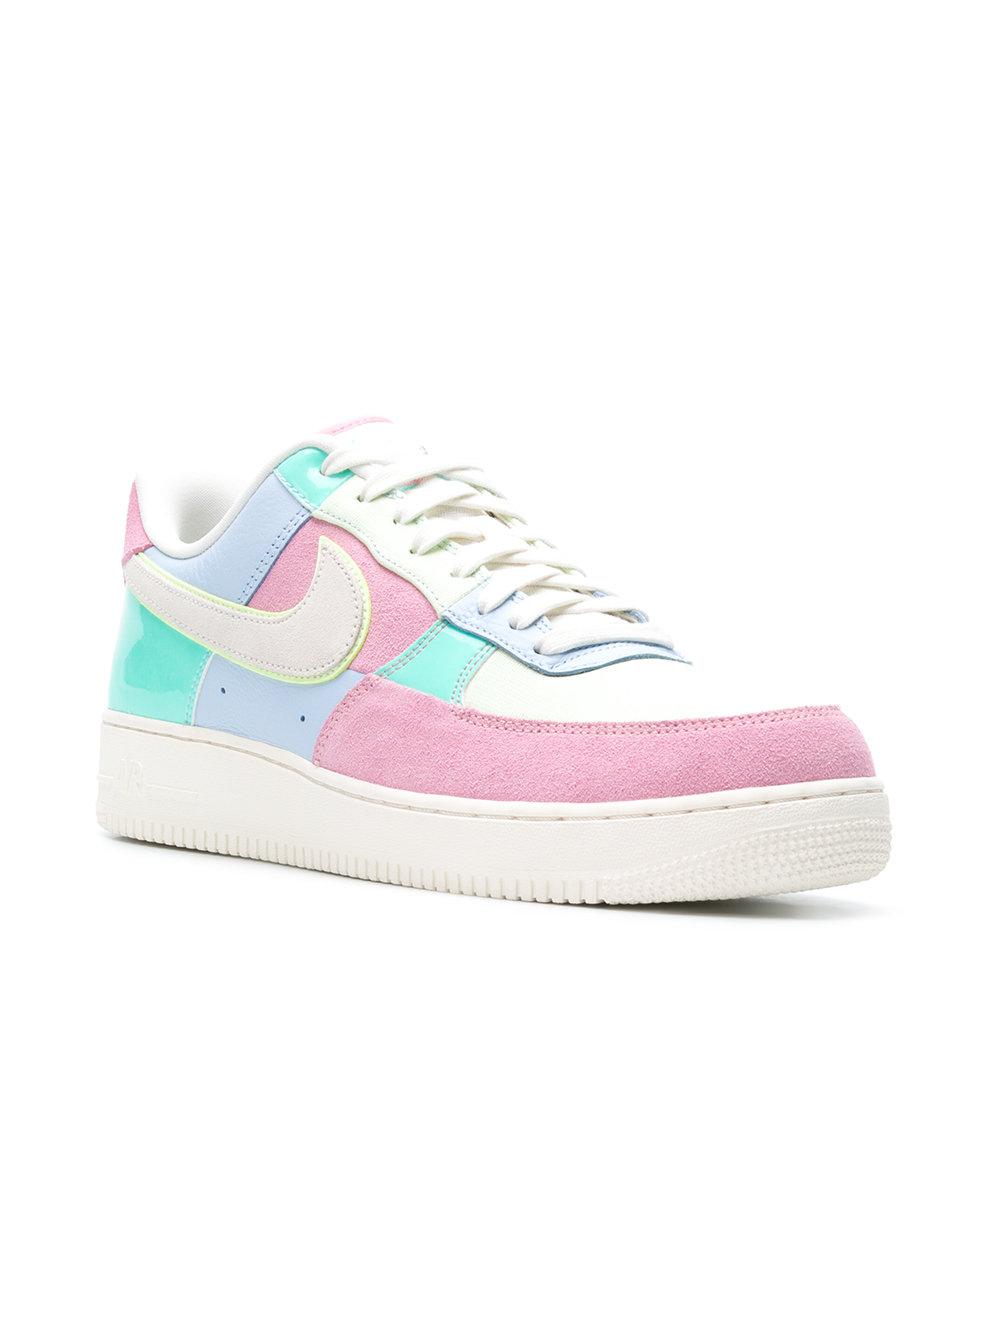 Nike Cotton Air Force 1 Easter Egg Sneakers | Lyst